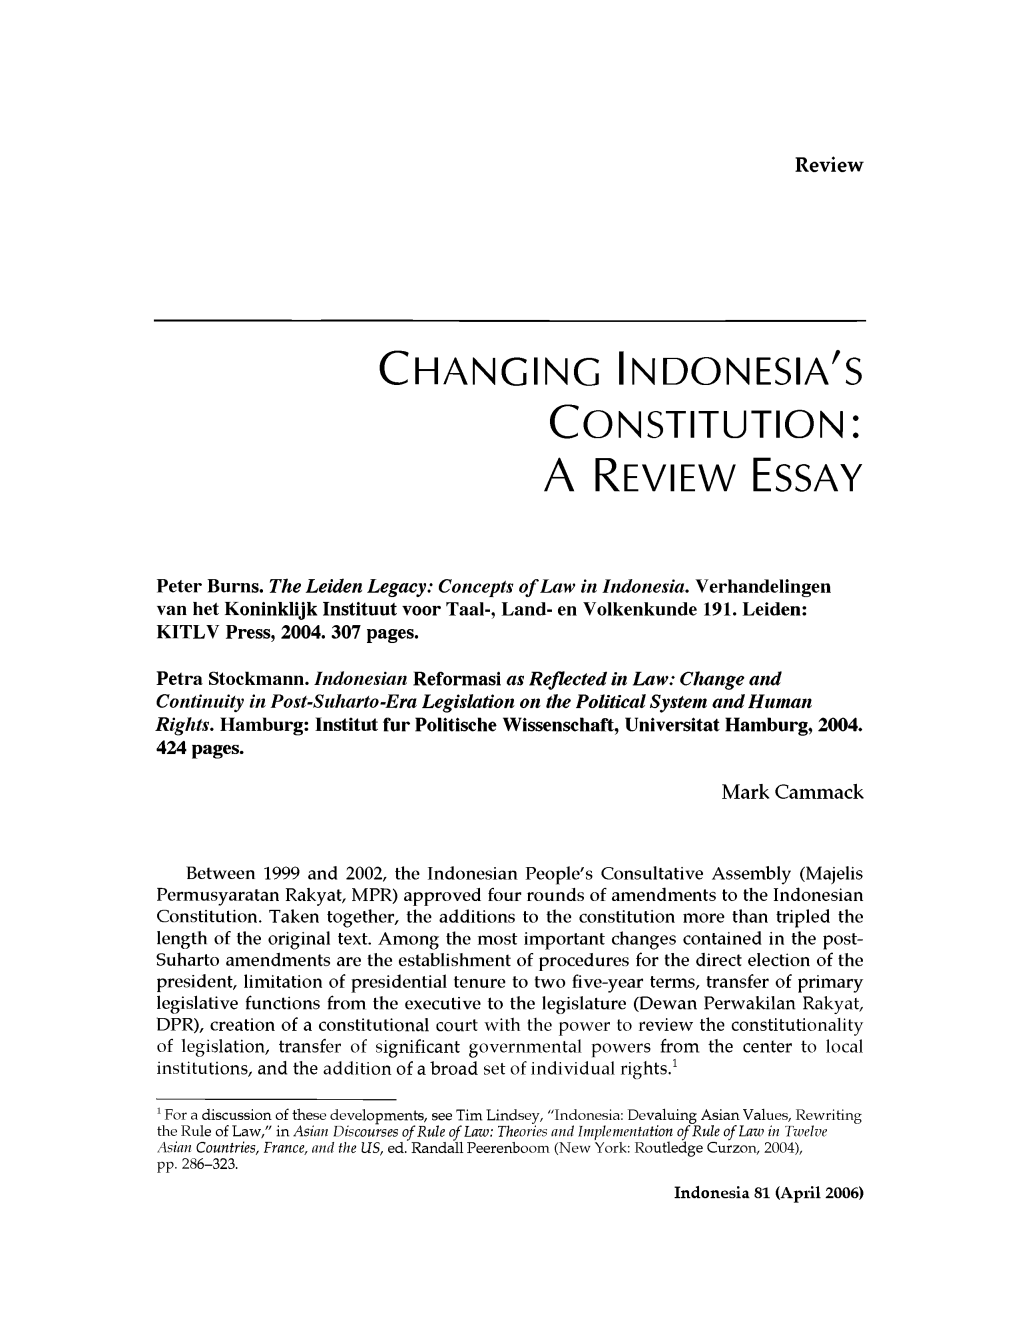 Changing Indonesia's Constitution: a Review Essay